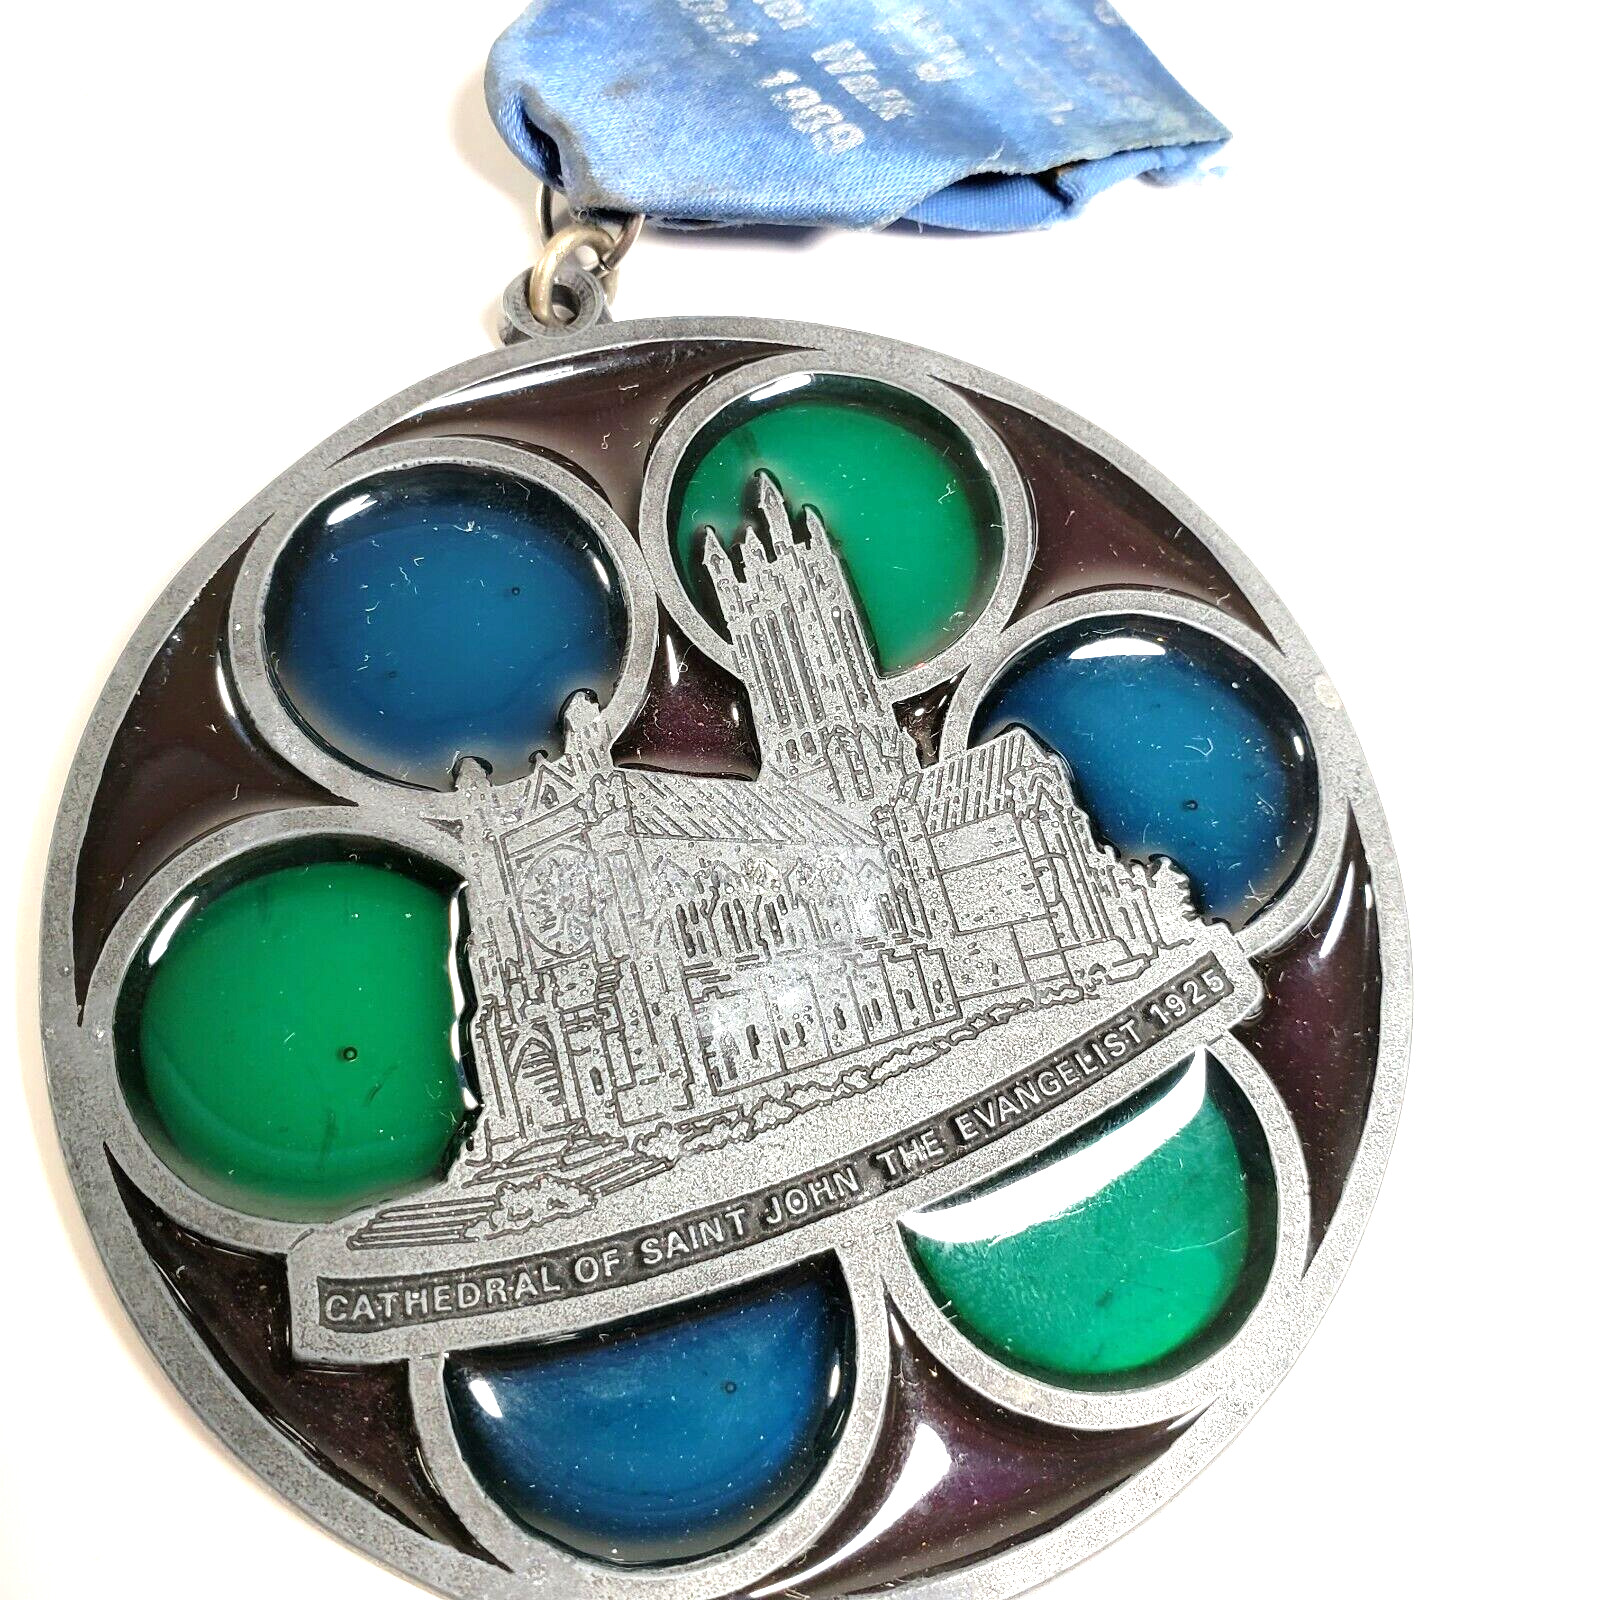 Cathedral of Saint John the Evangelist Summer Walk Pendant Collectible Medallion